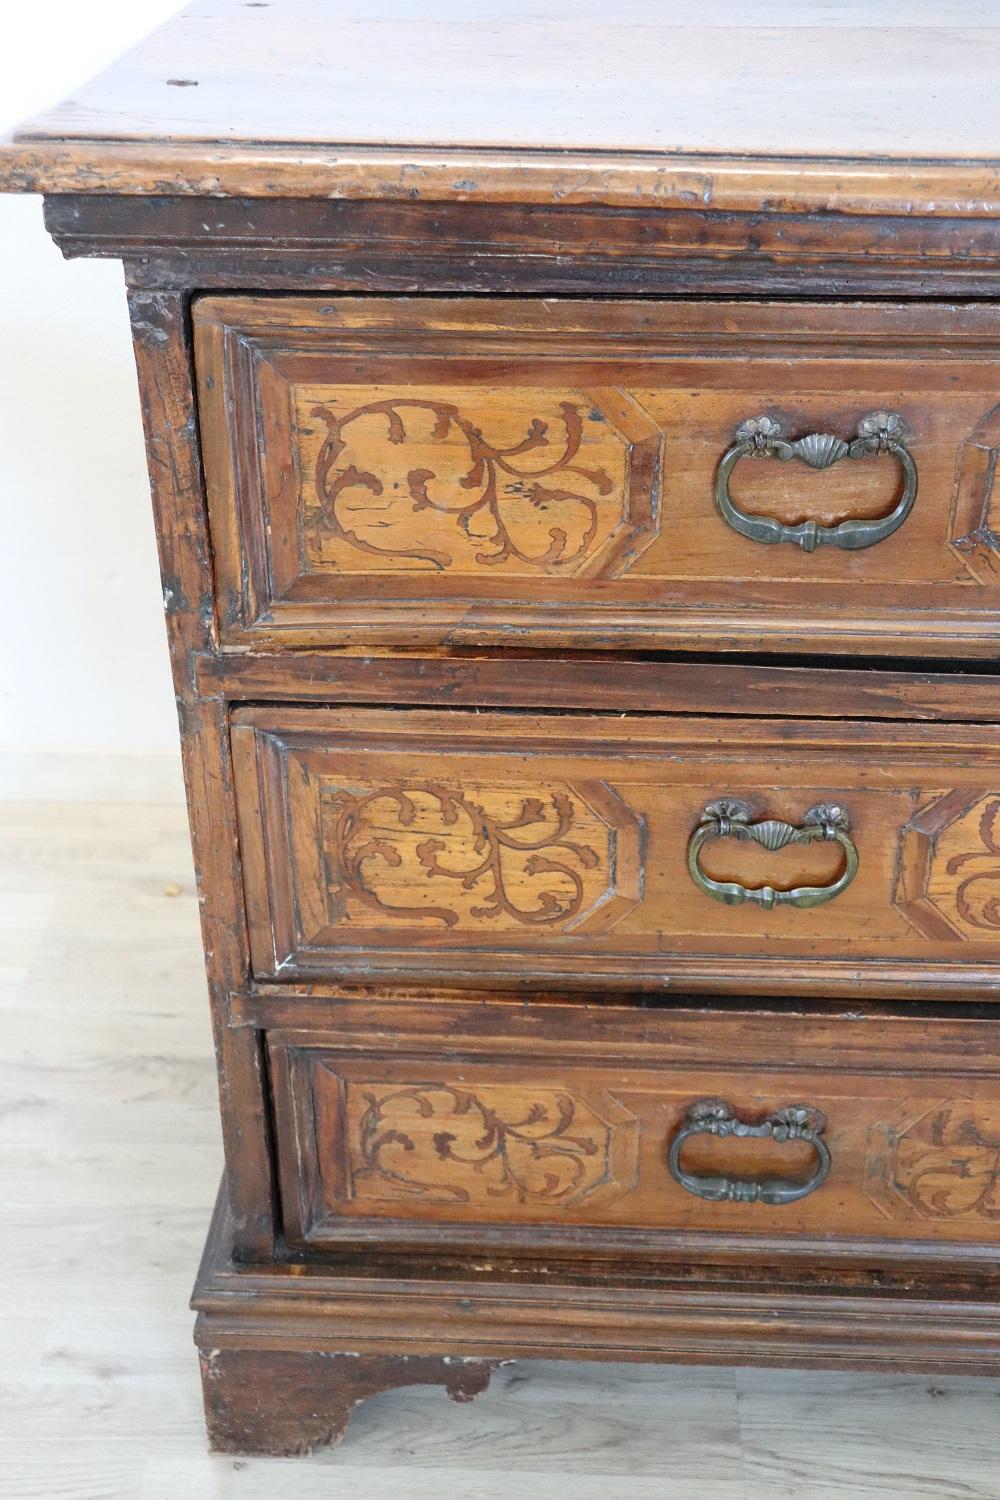 Late 17th Century 17th Century Italian Louis XIV Inlaid Walnut Antique Commode or Chest of Drawers